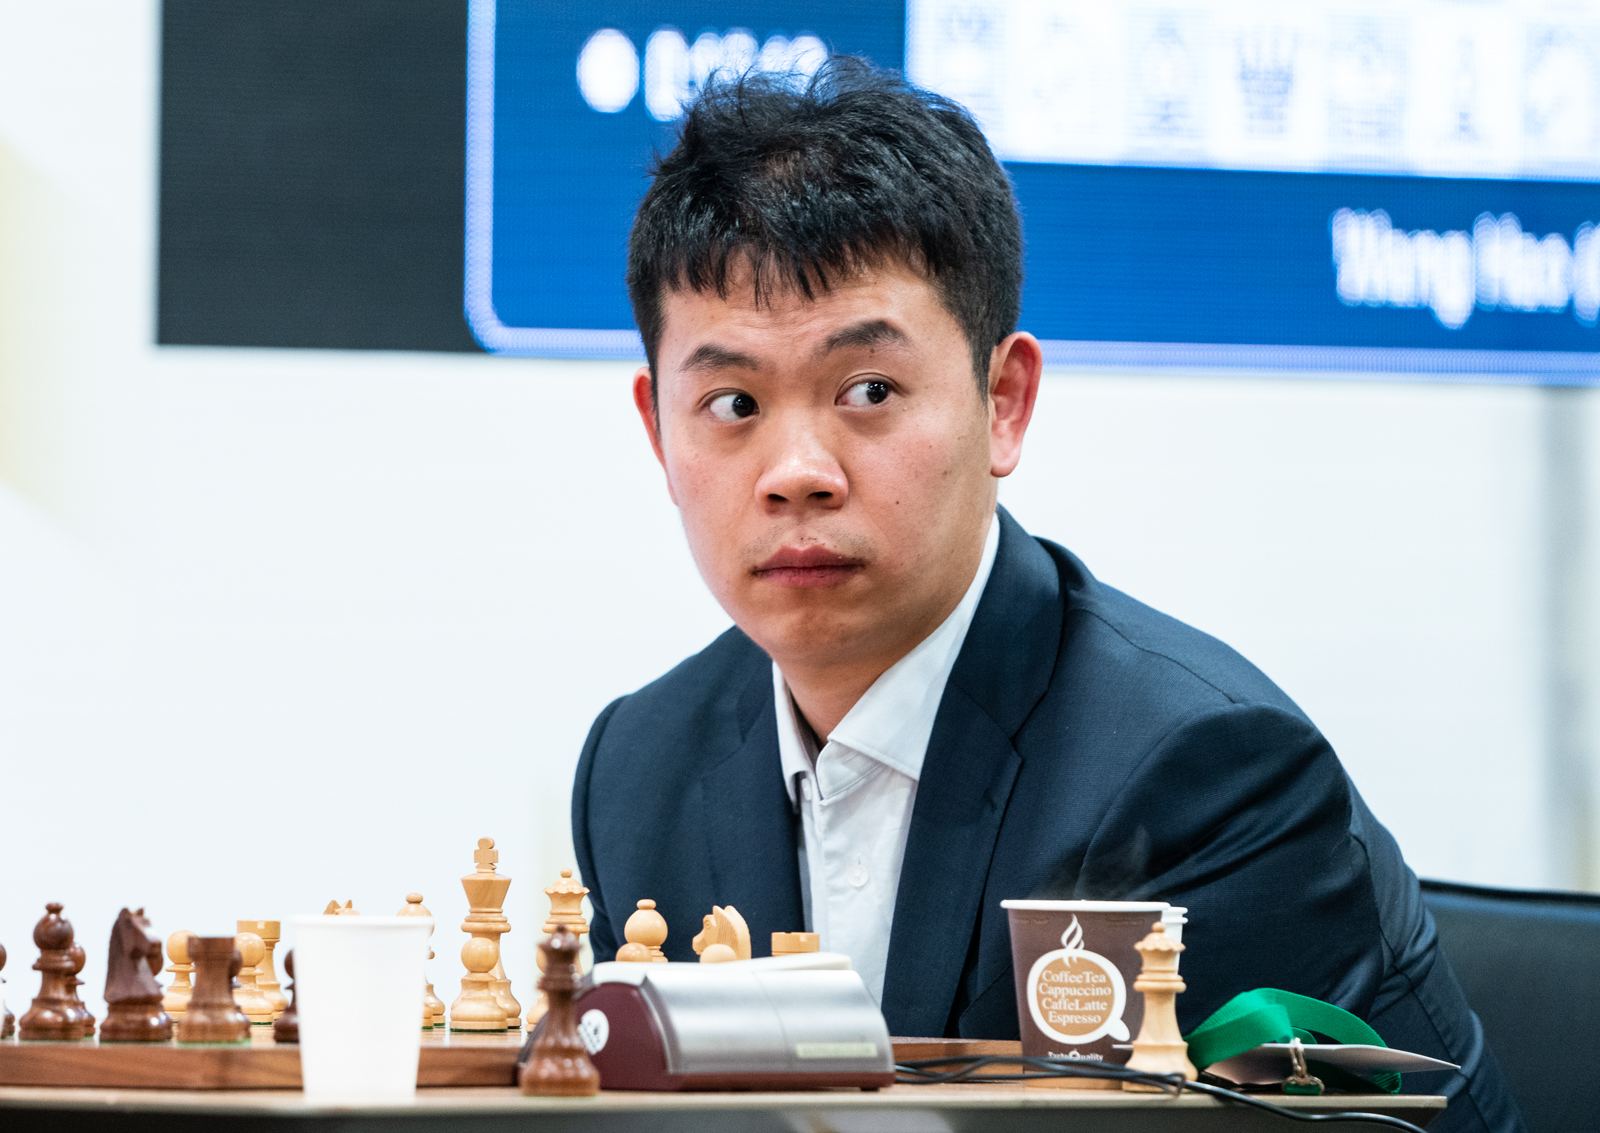 The 2020 Candidates: Wang Hao